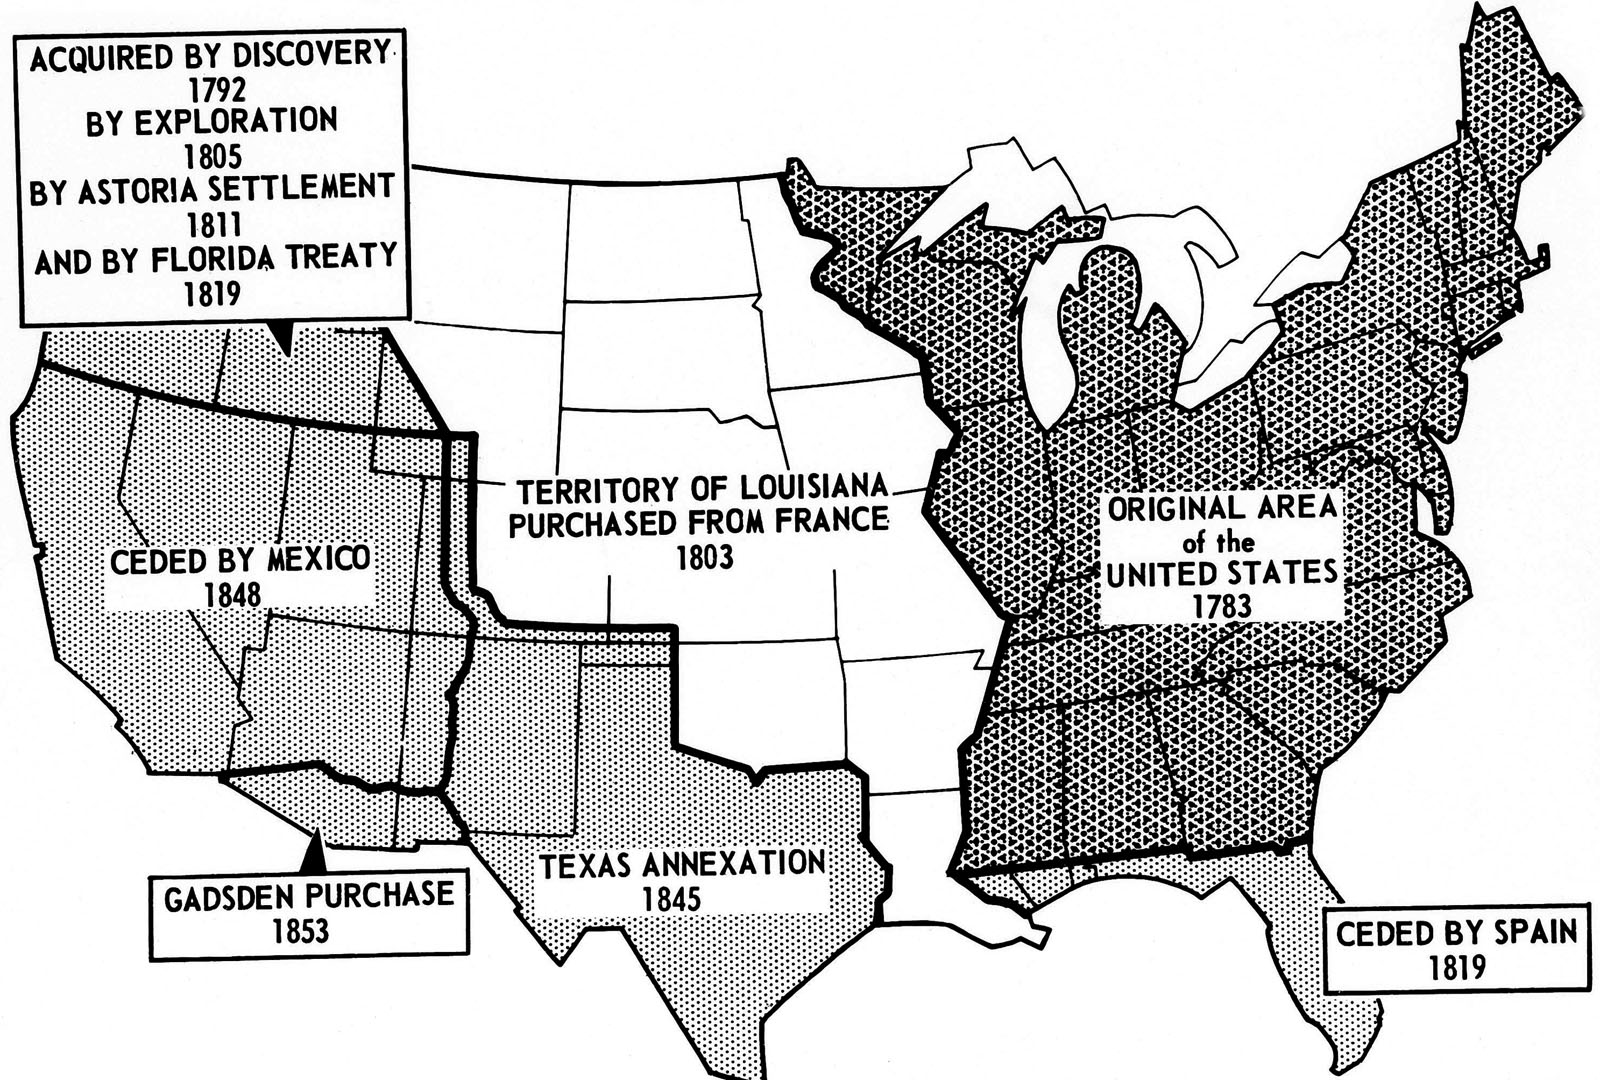 Map shows the vast stretch of land shown April 20, 1953, nearly a million square miles, which the U.S. acquired from France in the Louisiana Purchase of 1803 and the subsequent westward and southward expansion that brought America to its present continental limits just half a century later, in 1953. The Louisiana Purchase involved total payments of $27,267,622. (AP Photo)